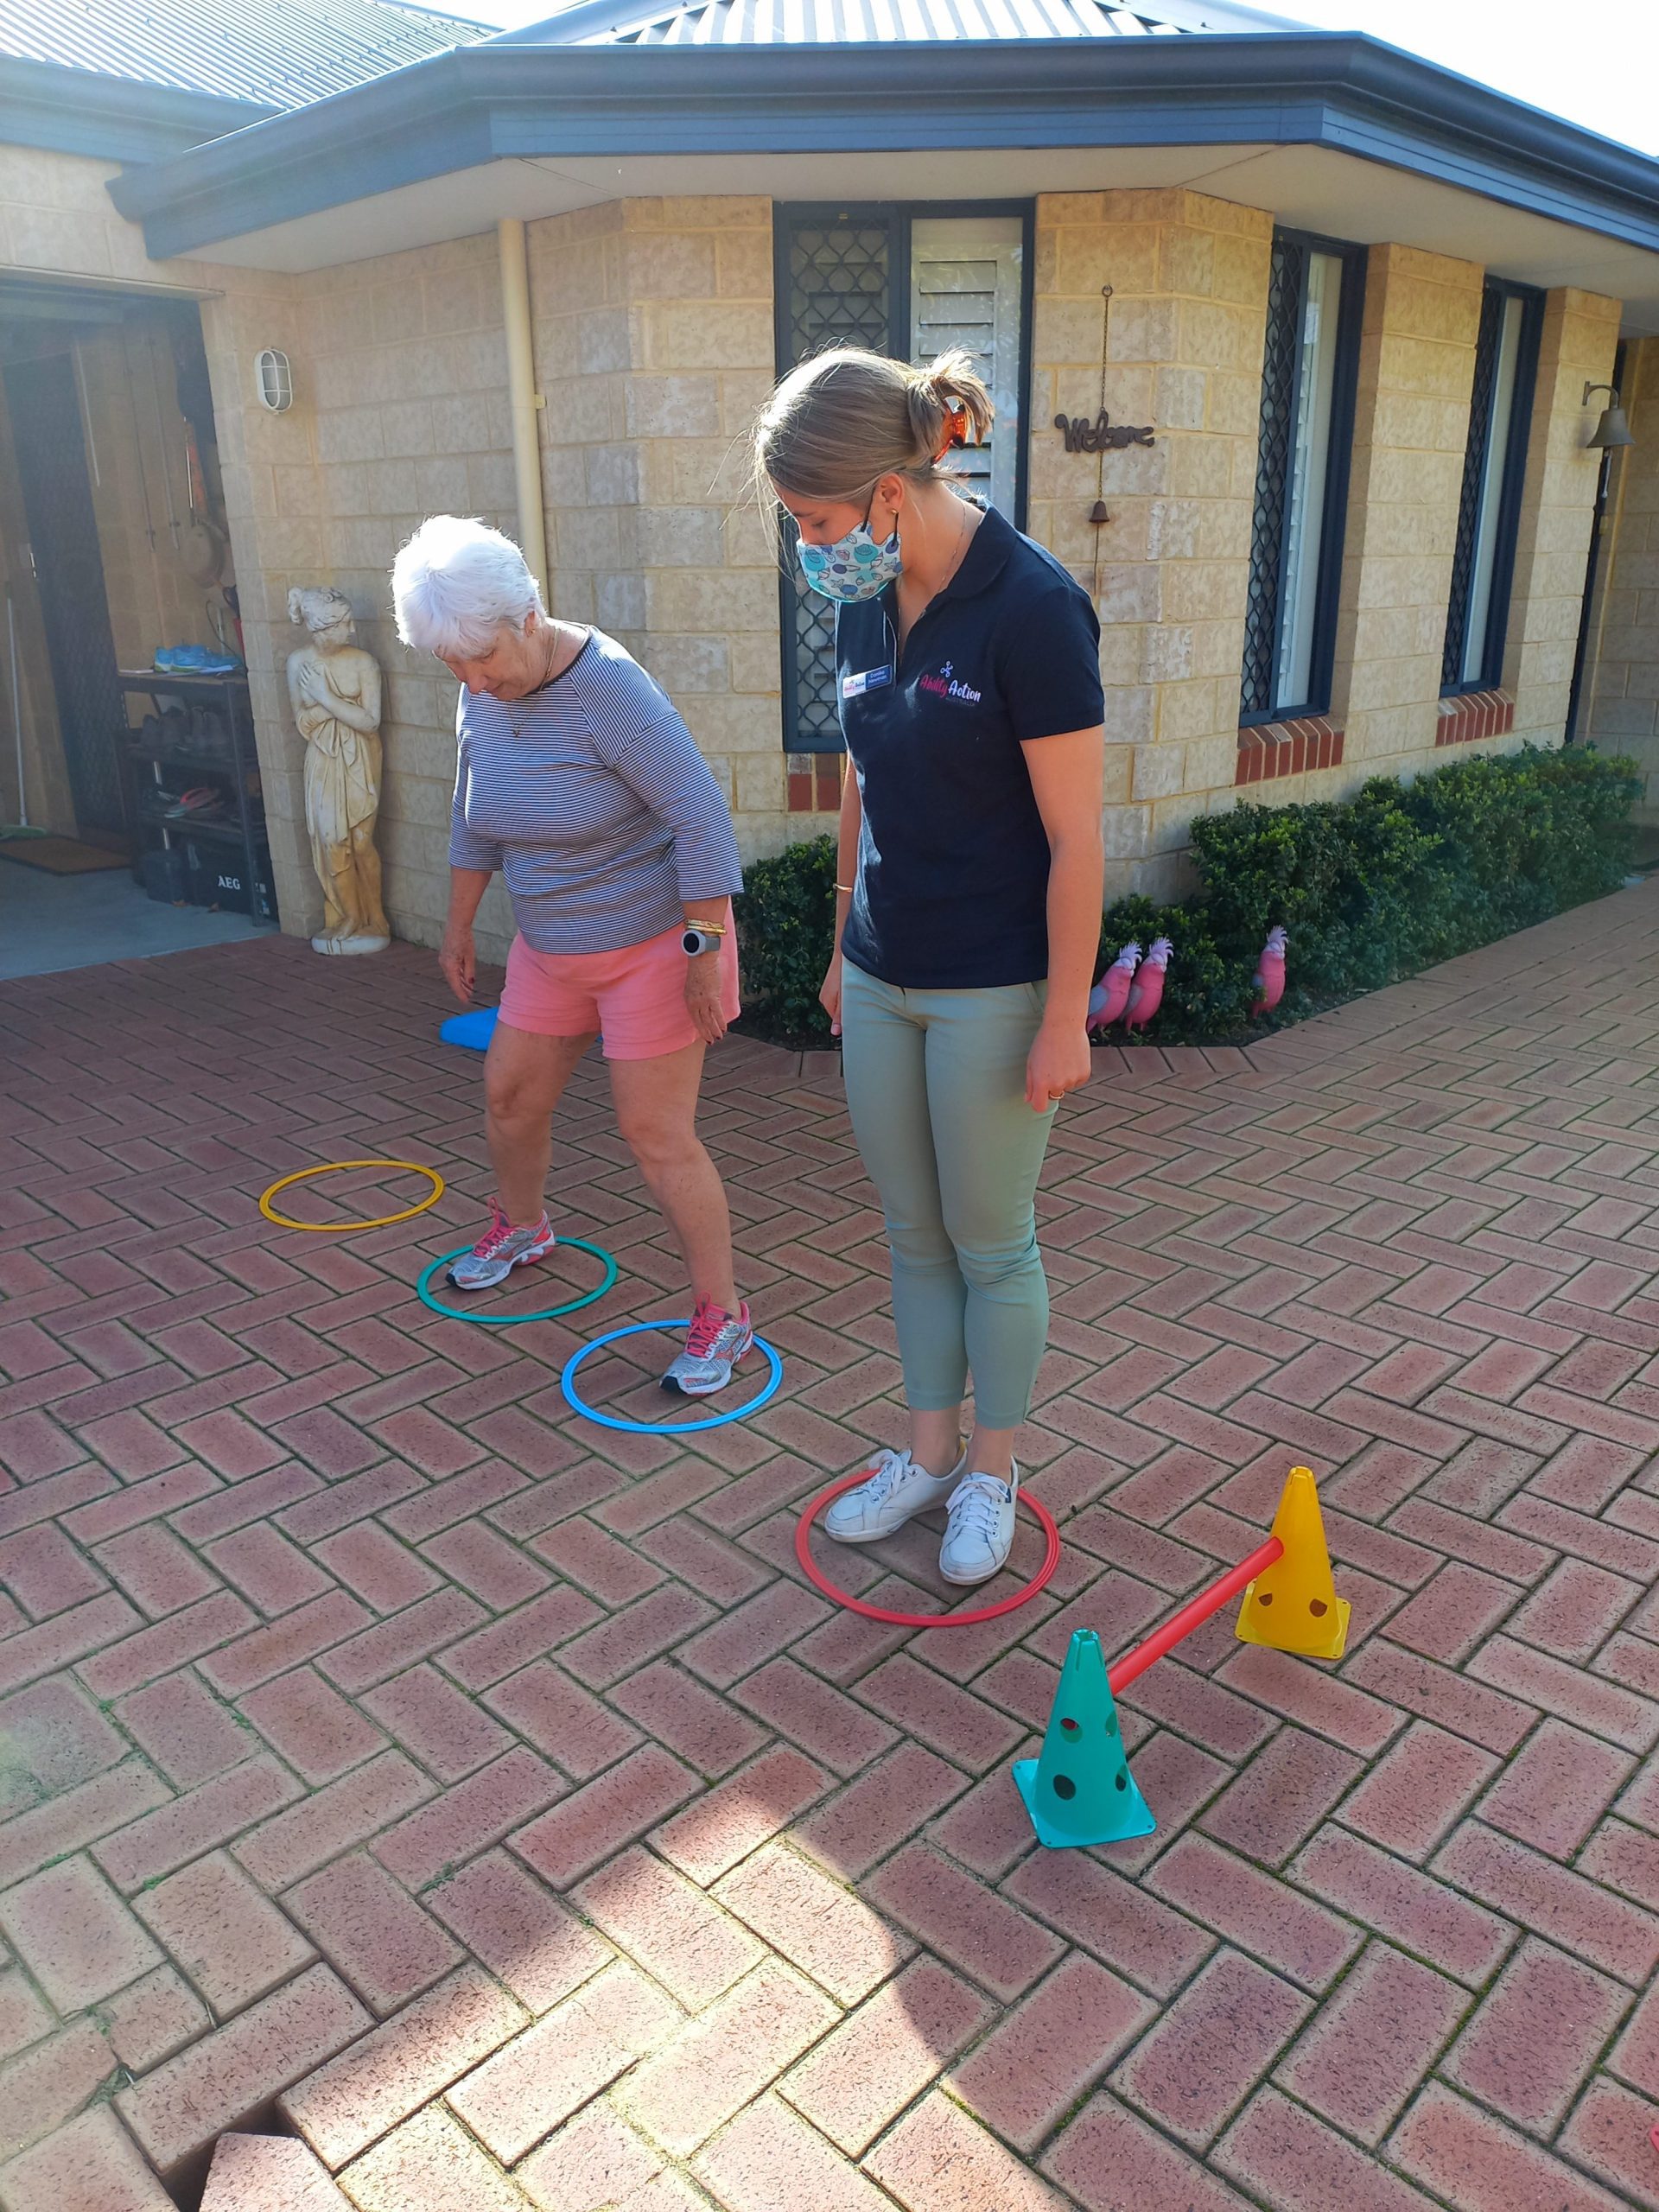 Appointment with accredited exercise physiologists taking place in driveway